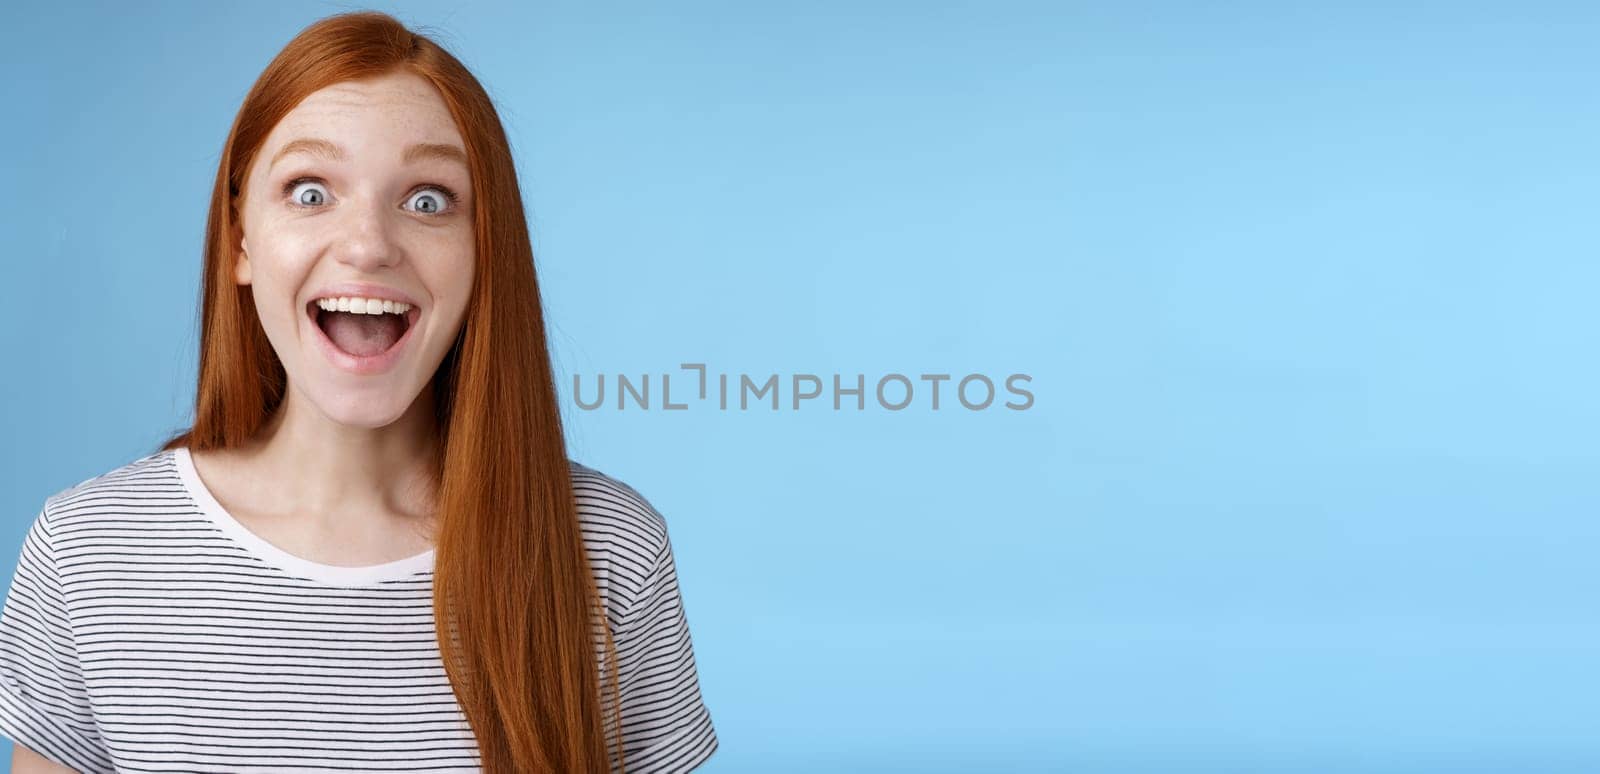 Surprised pleased happy impressed redhead european girl 20s reacting amused wide eyes look admiration joy receive incredible offer standing excited express thrill upbeat feelings, blue background.